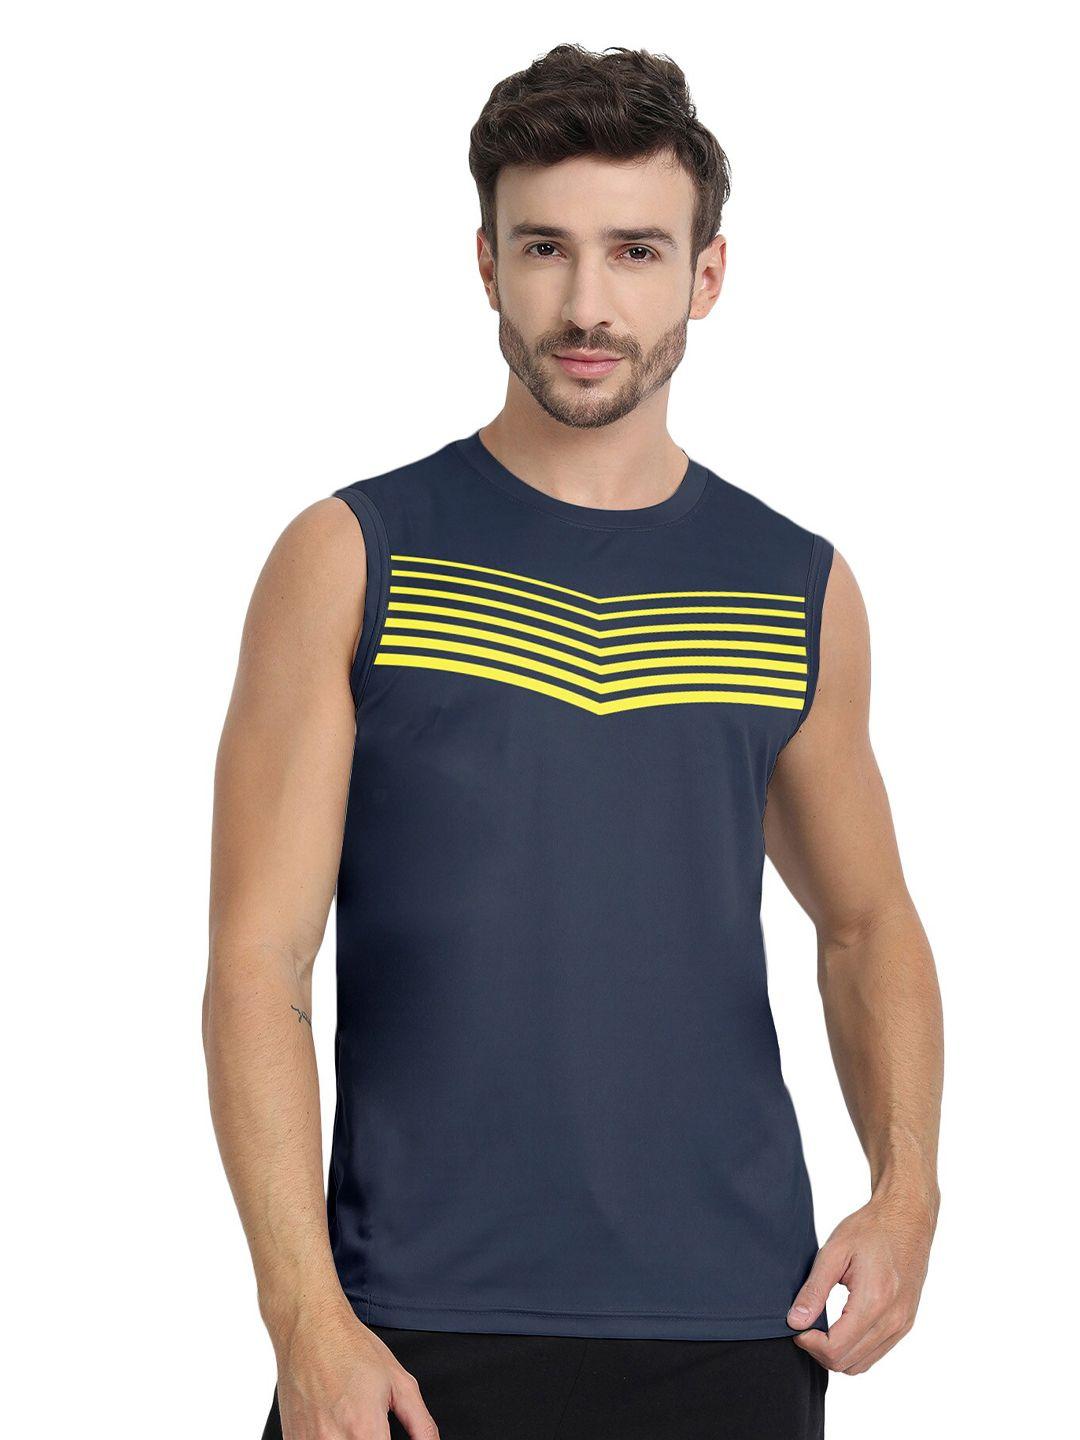 ftx striped knitted sports t-shirt